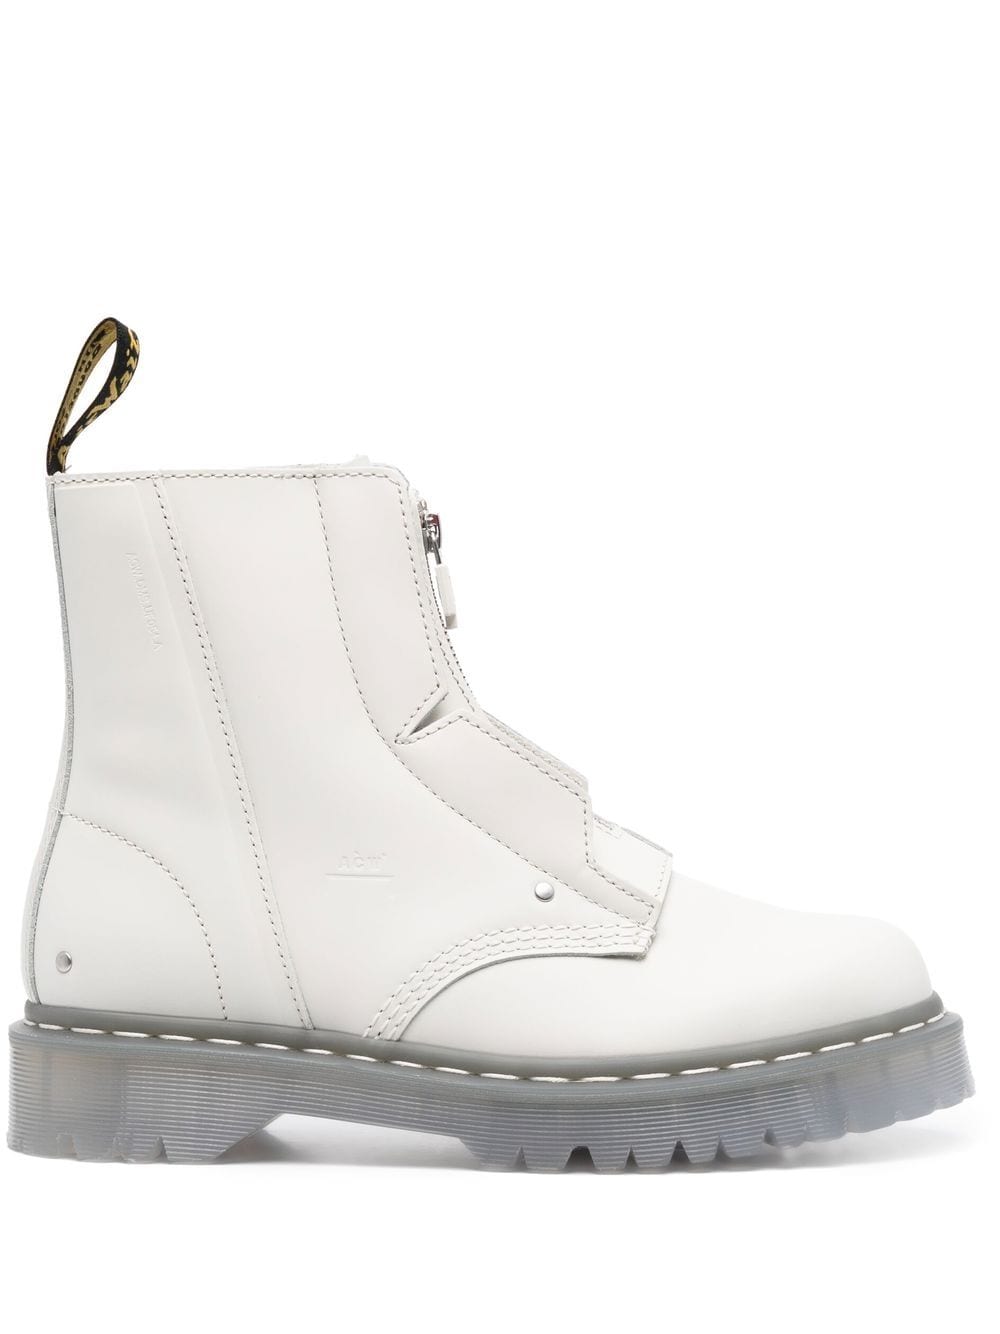 A-COLD-WALL* x Dr. Martens 1460 Bex ankle boots - Neutrals von A-COLD-WALL*